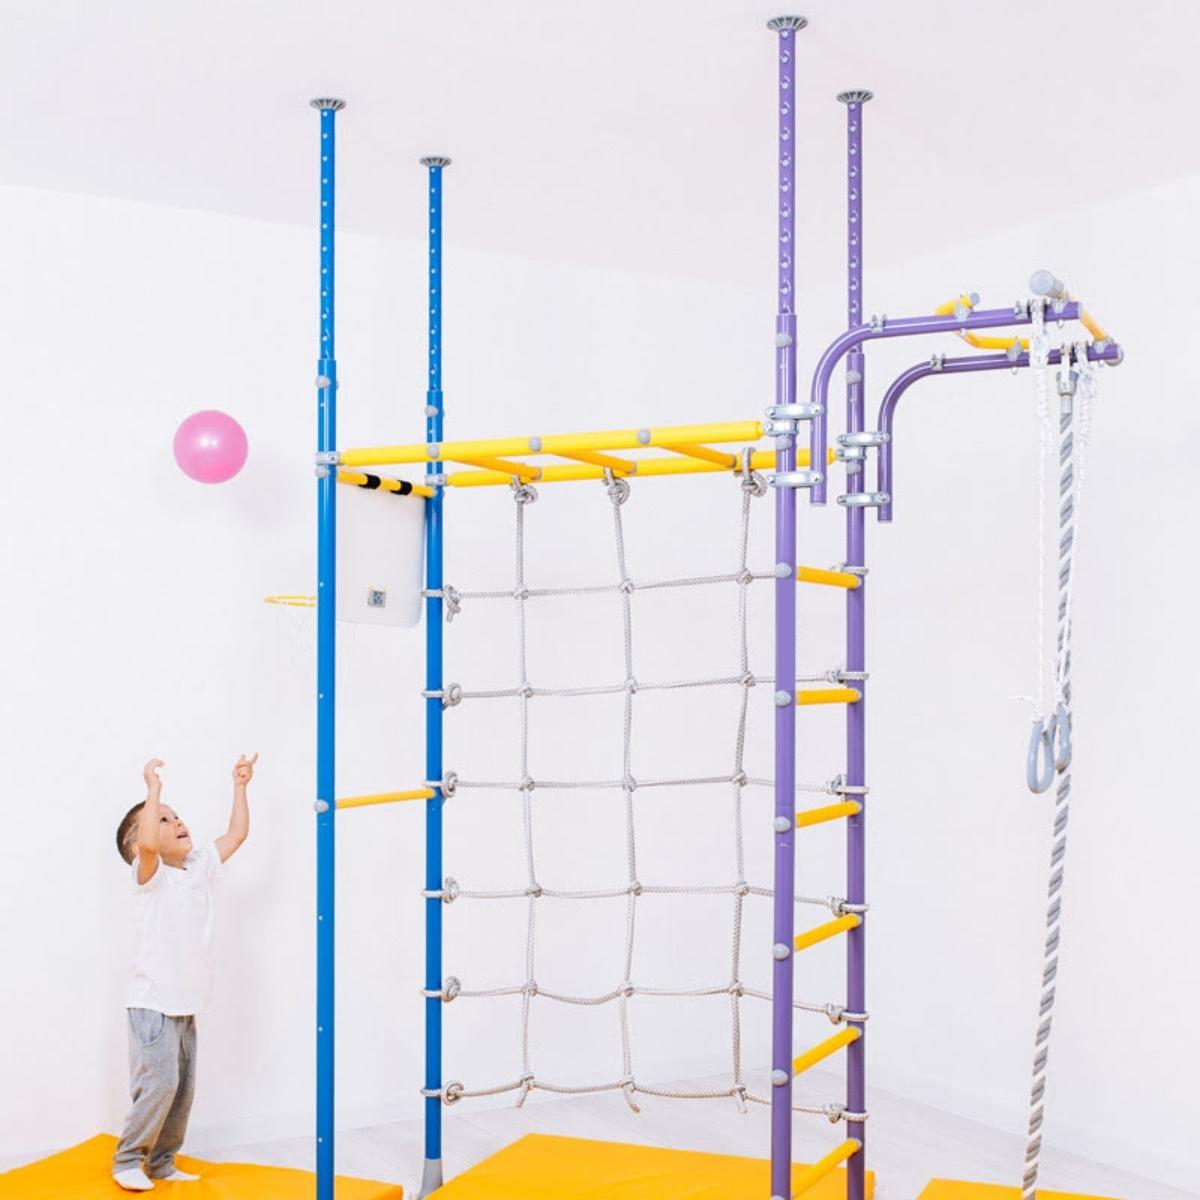 What is the best play equipment? or What is the most popular playground equipment? Explore our beautiful range of Indoor home play gyms for kids of all ages